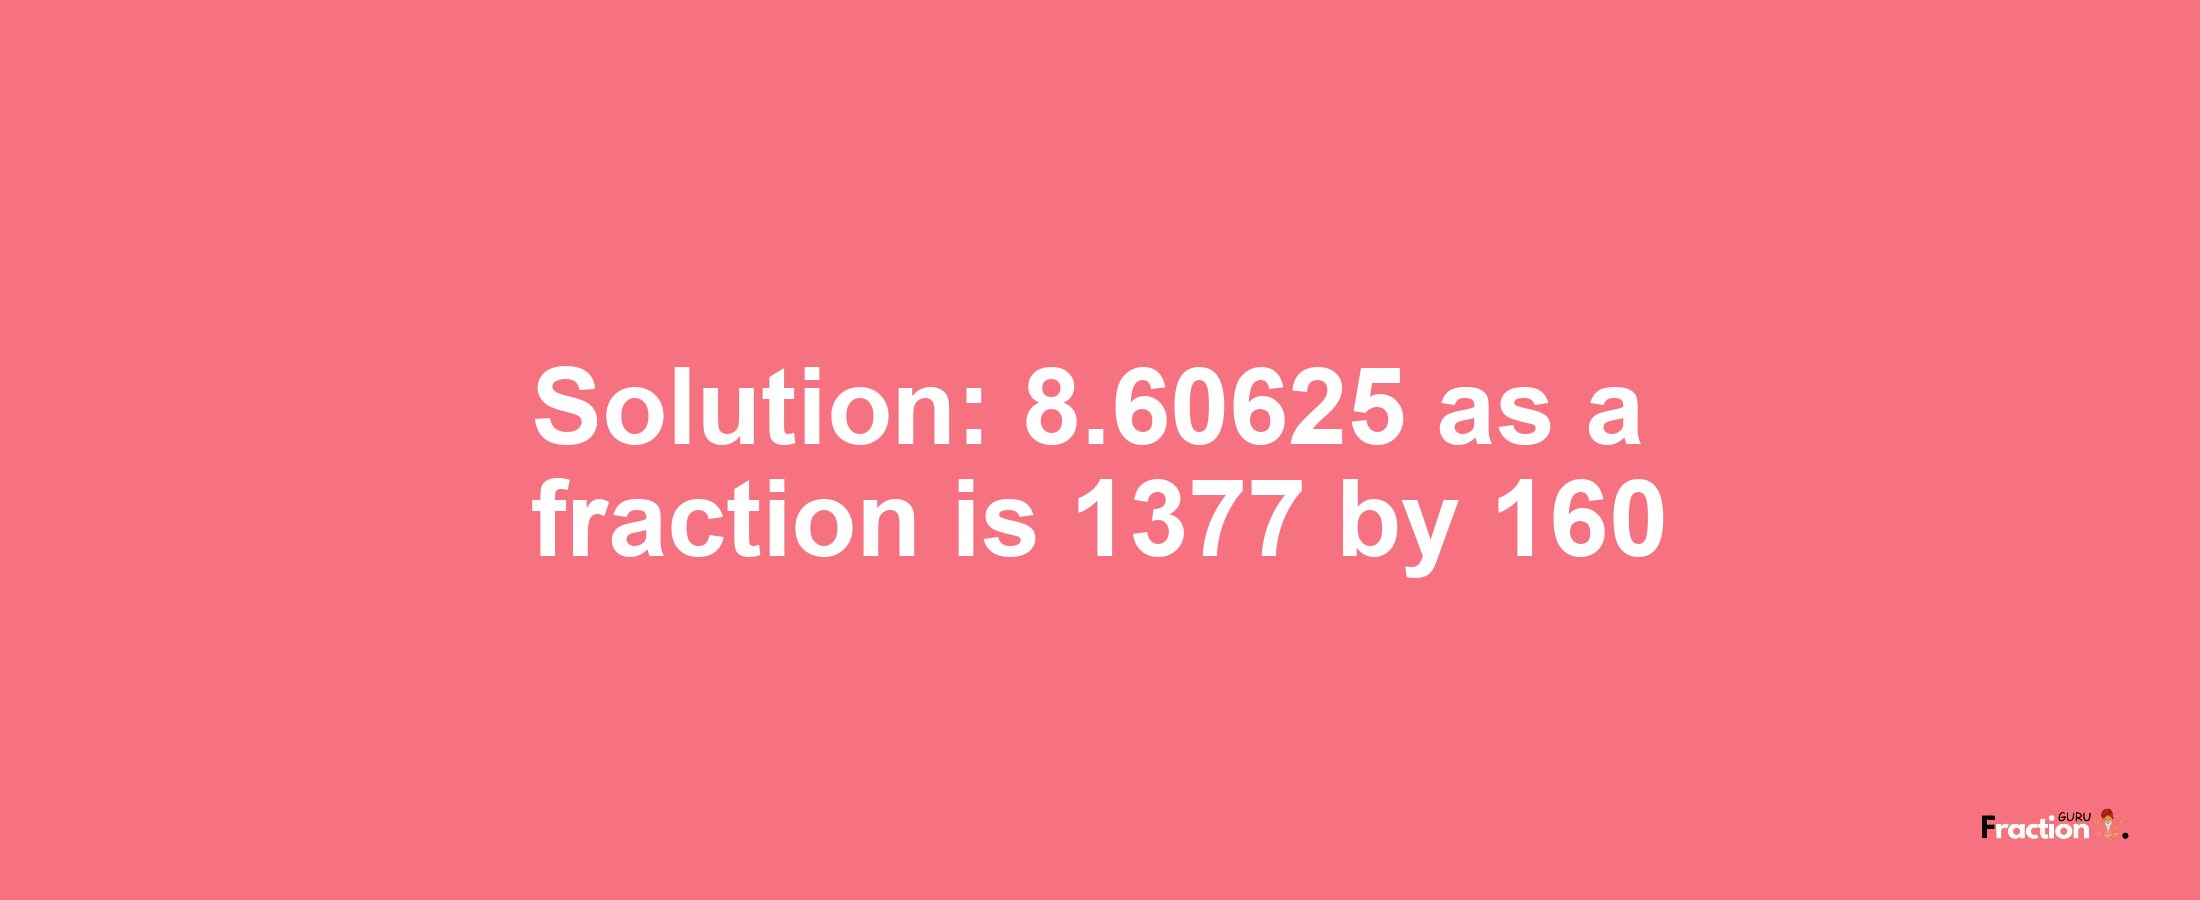 Solution:8.60625 as a fraction is 1377/160